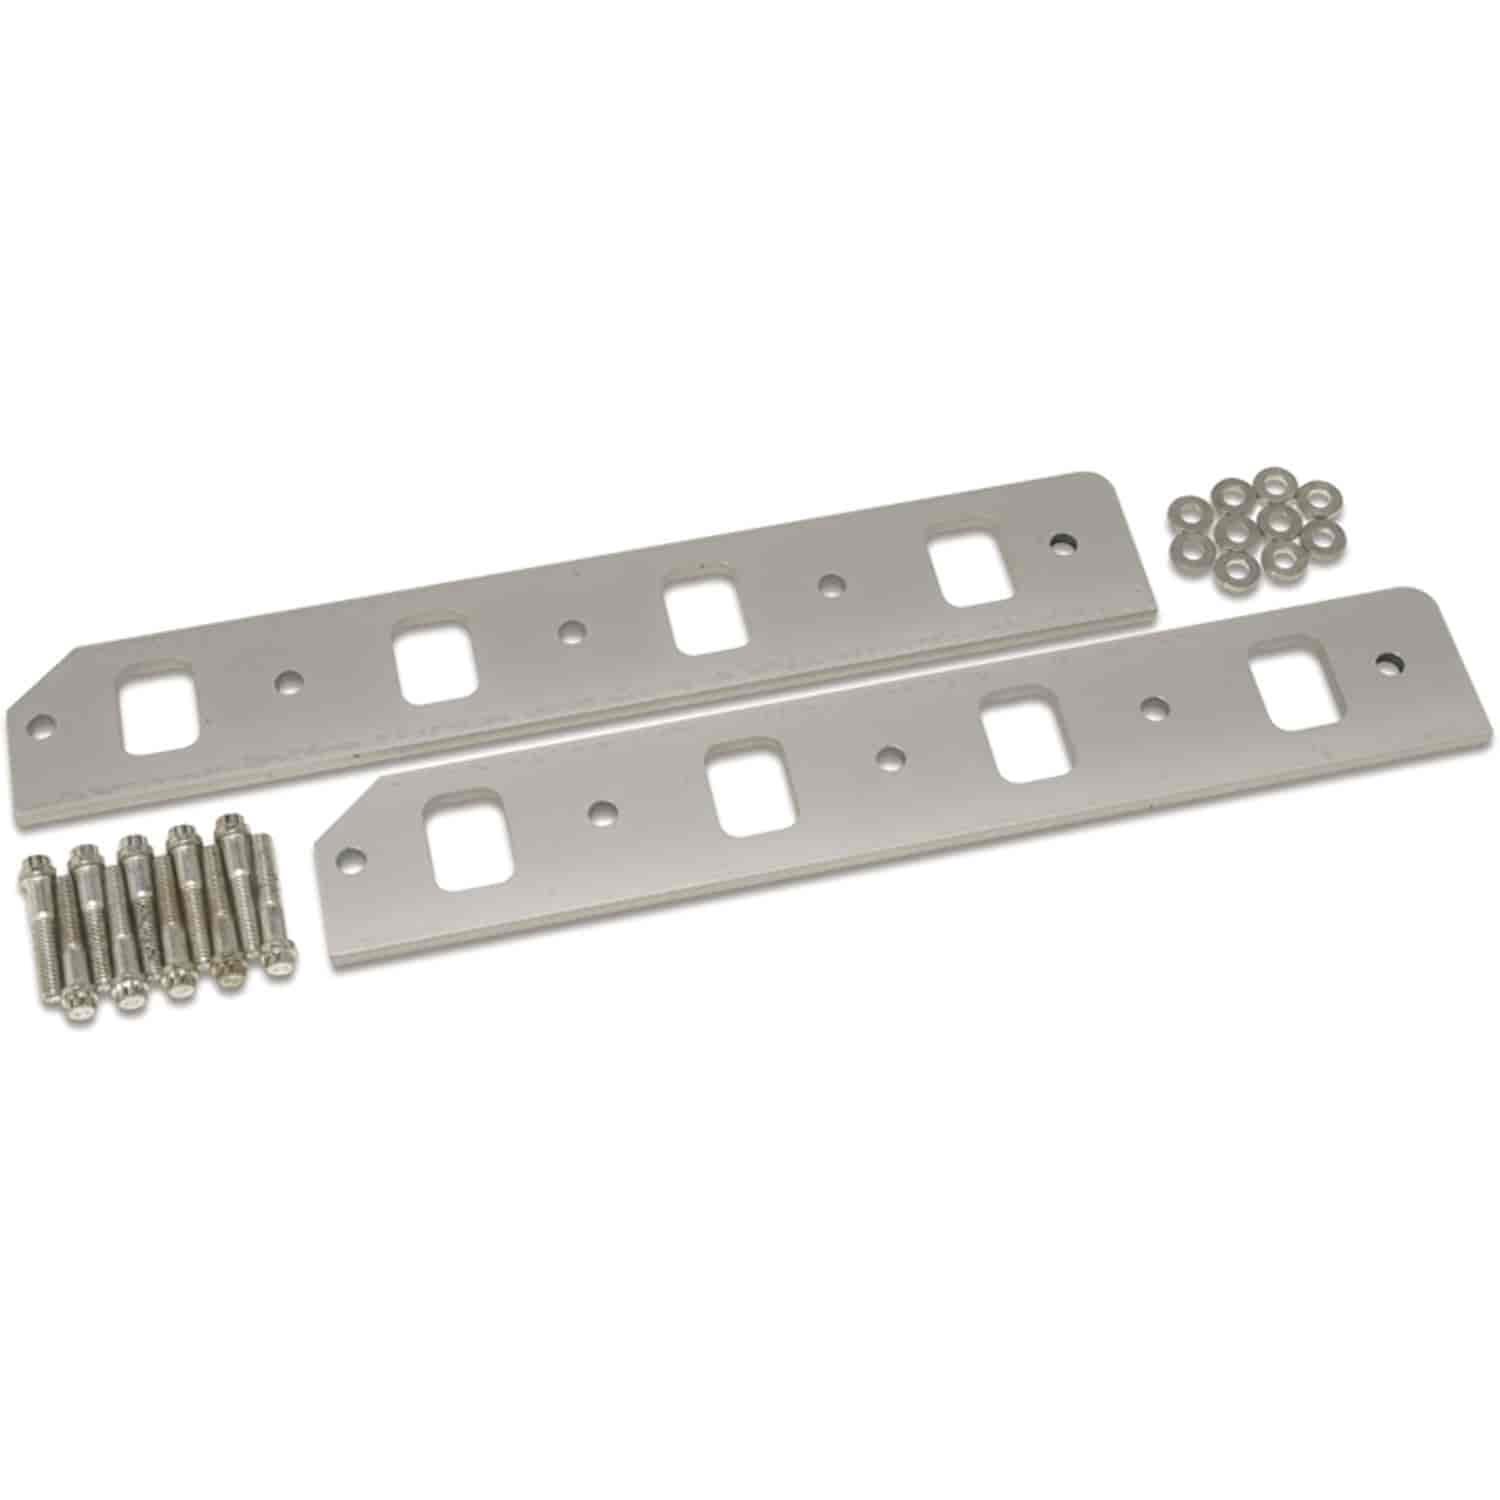 Spacer Plate & Bolt Kit for 351W Victor